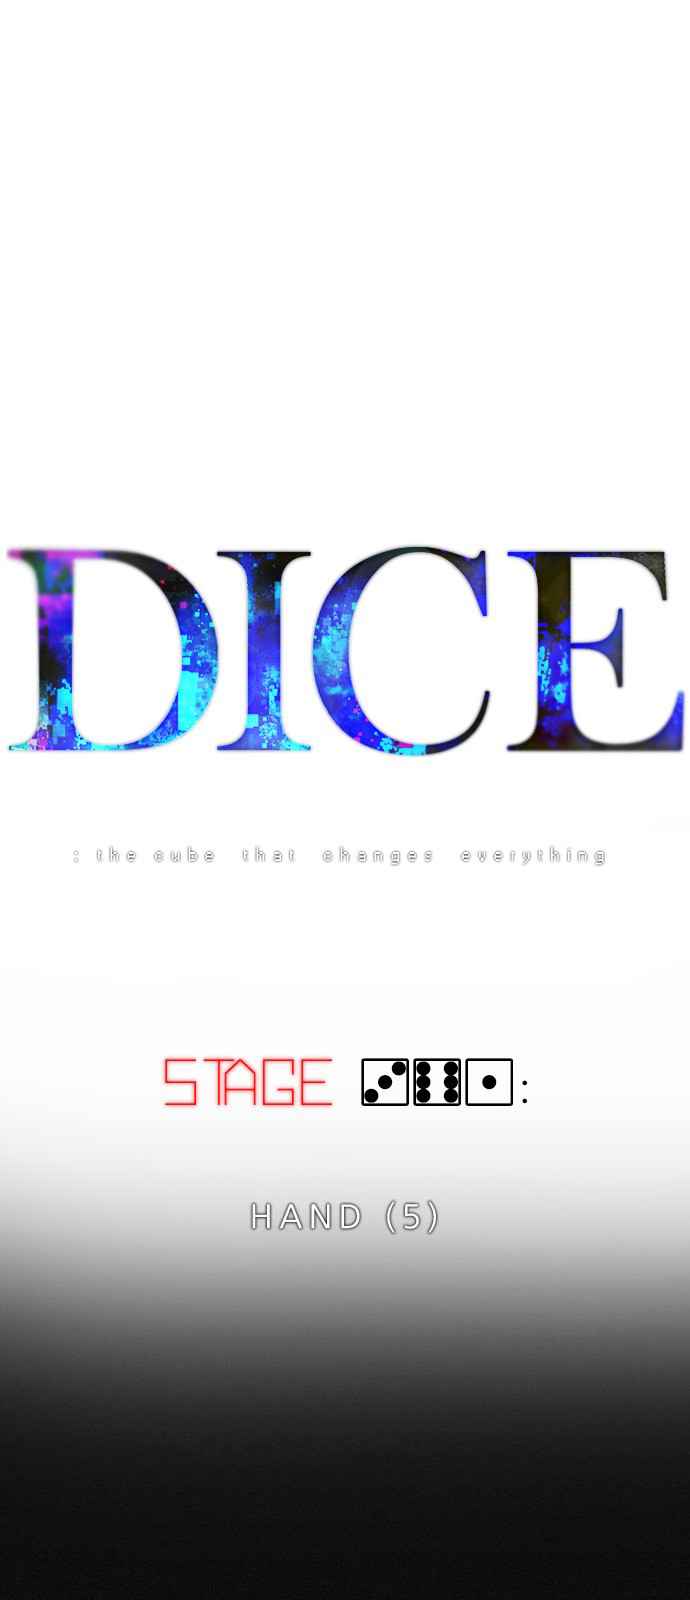 DICE: The Cube That Changes Everything Ch. 361 HAND (5)